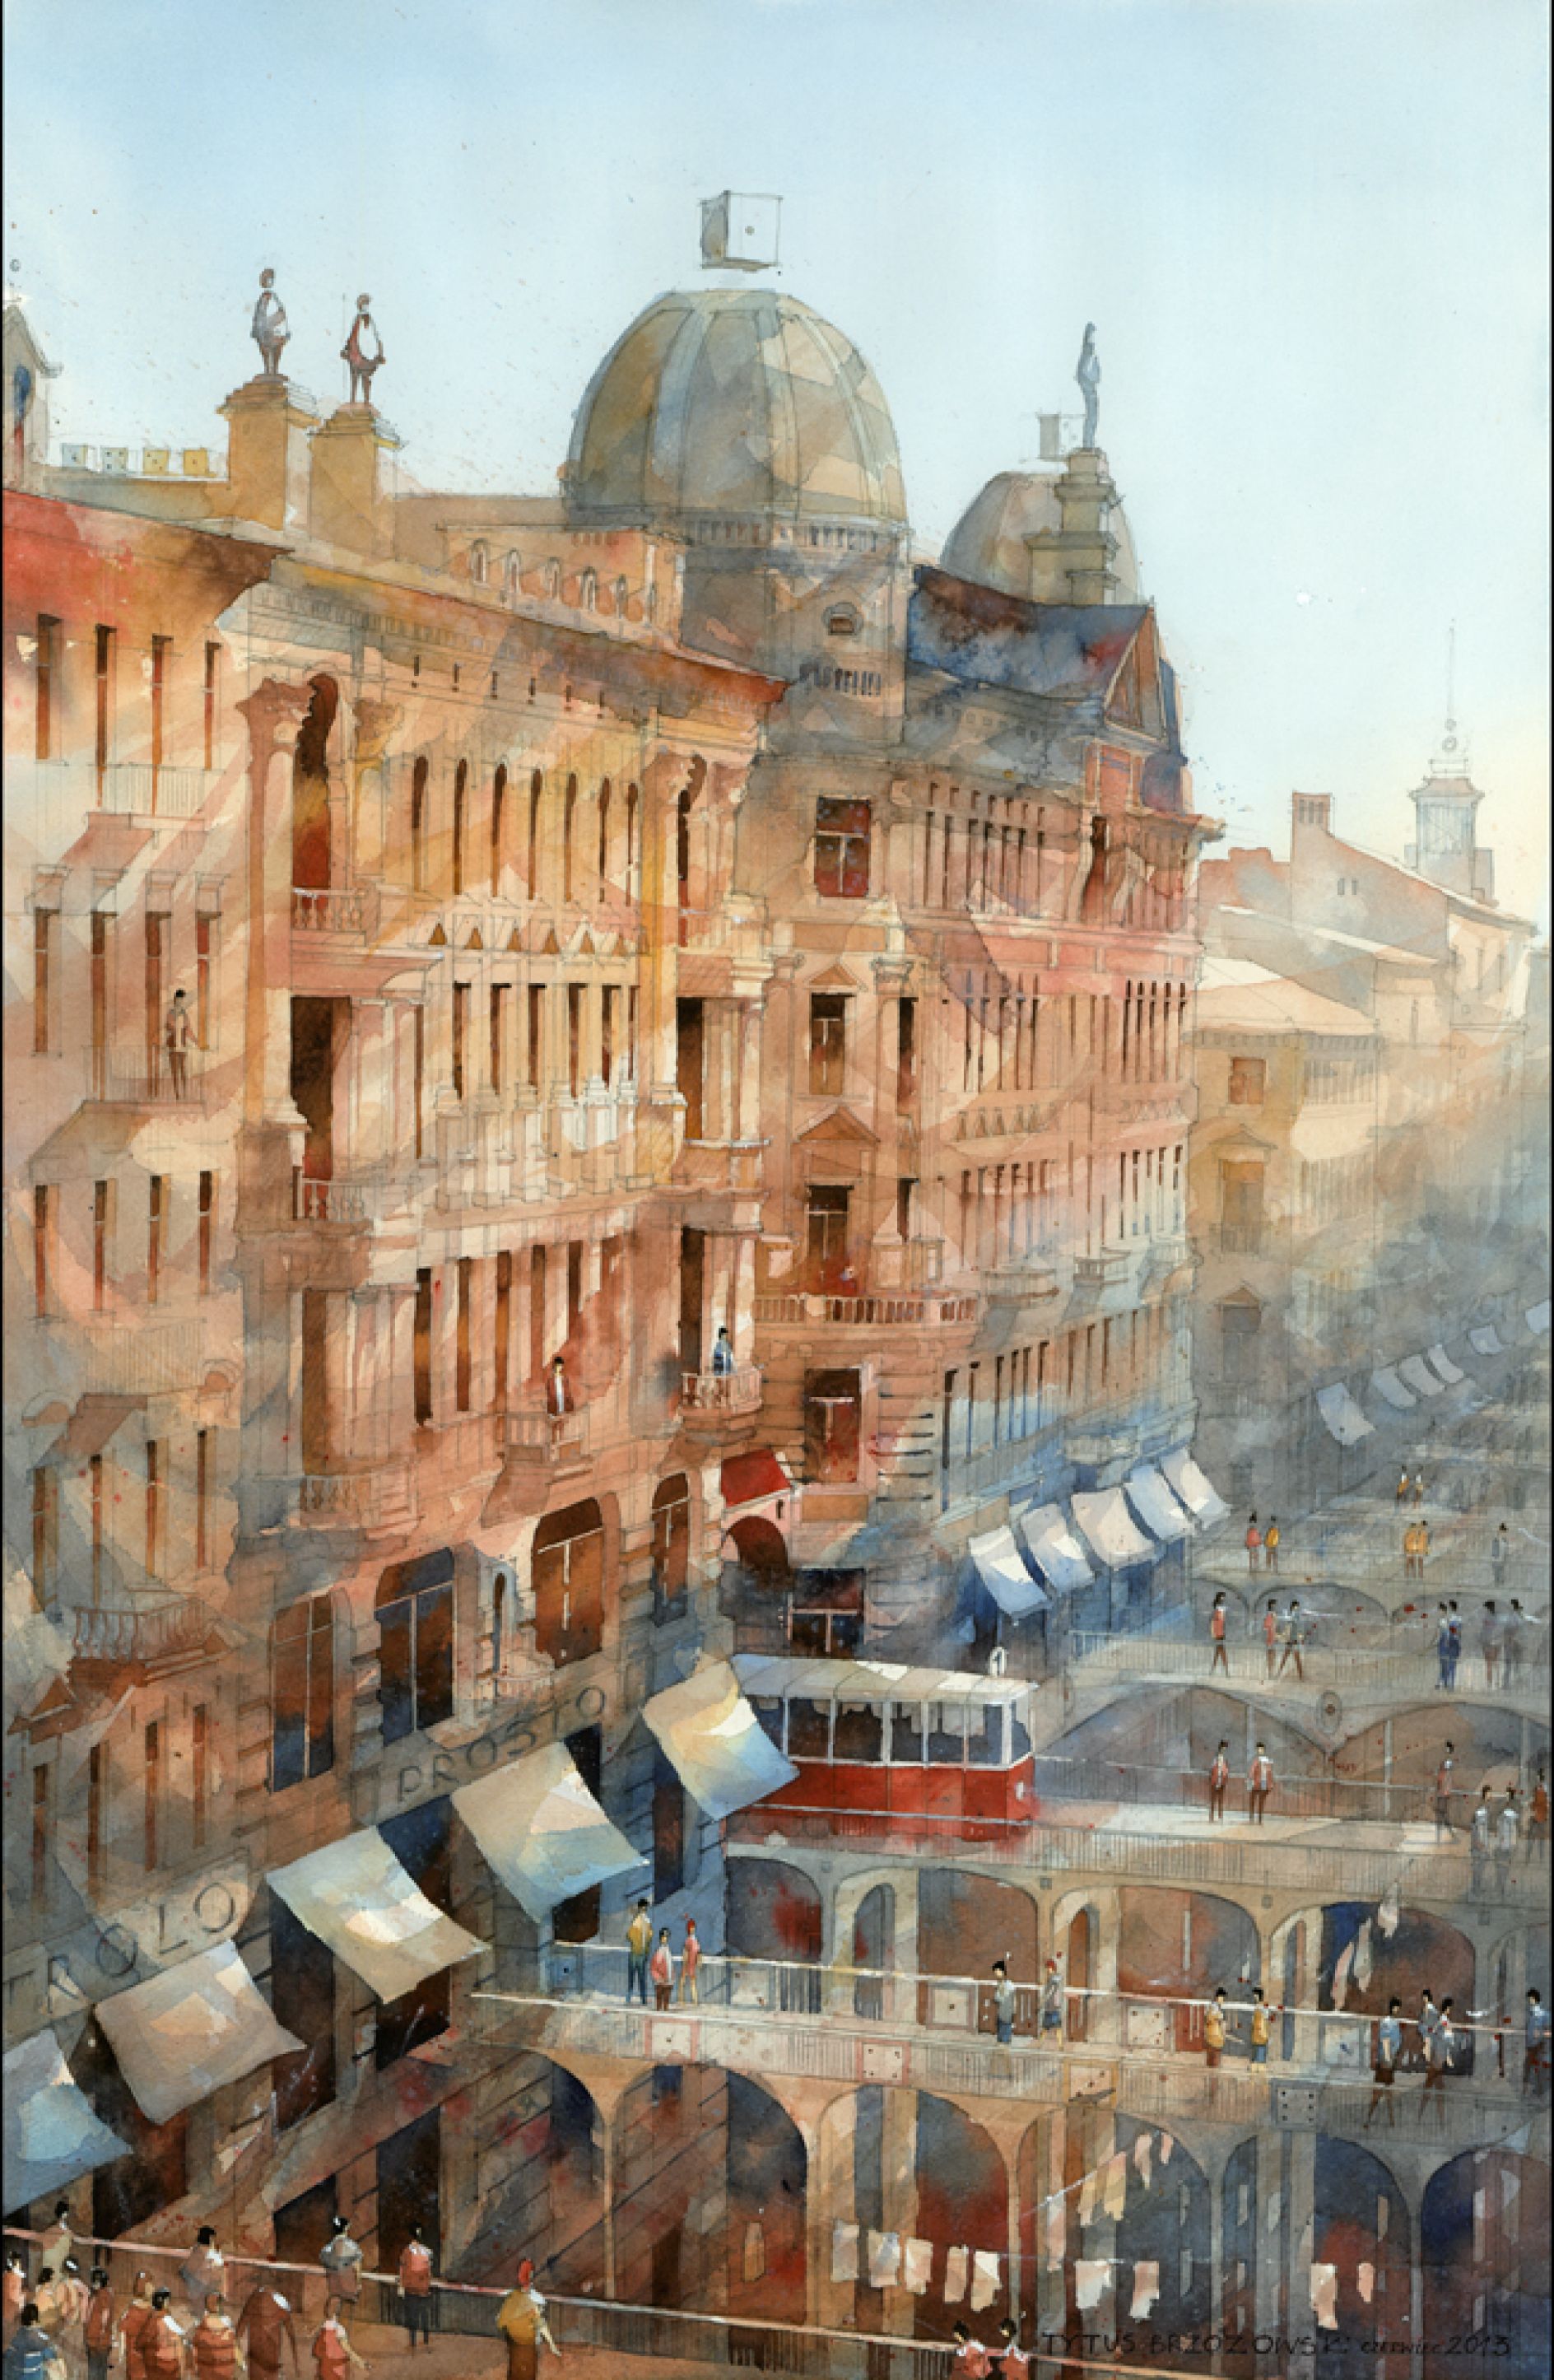 City of Dreams: Paintings combine Warsaw's traditional architectural ...